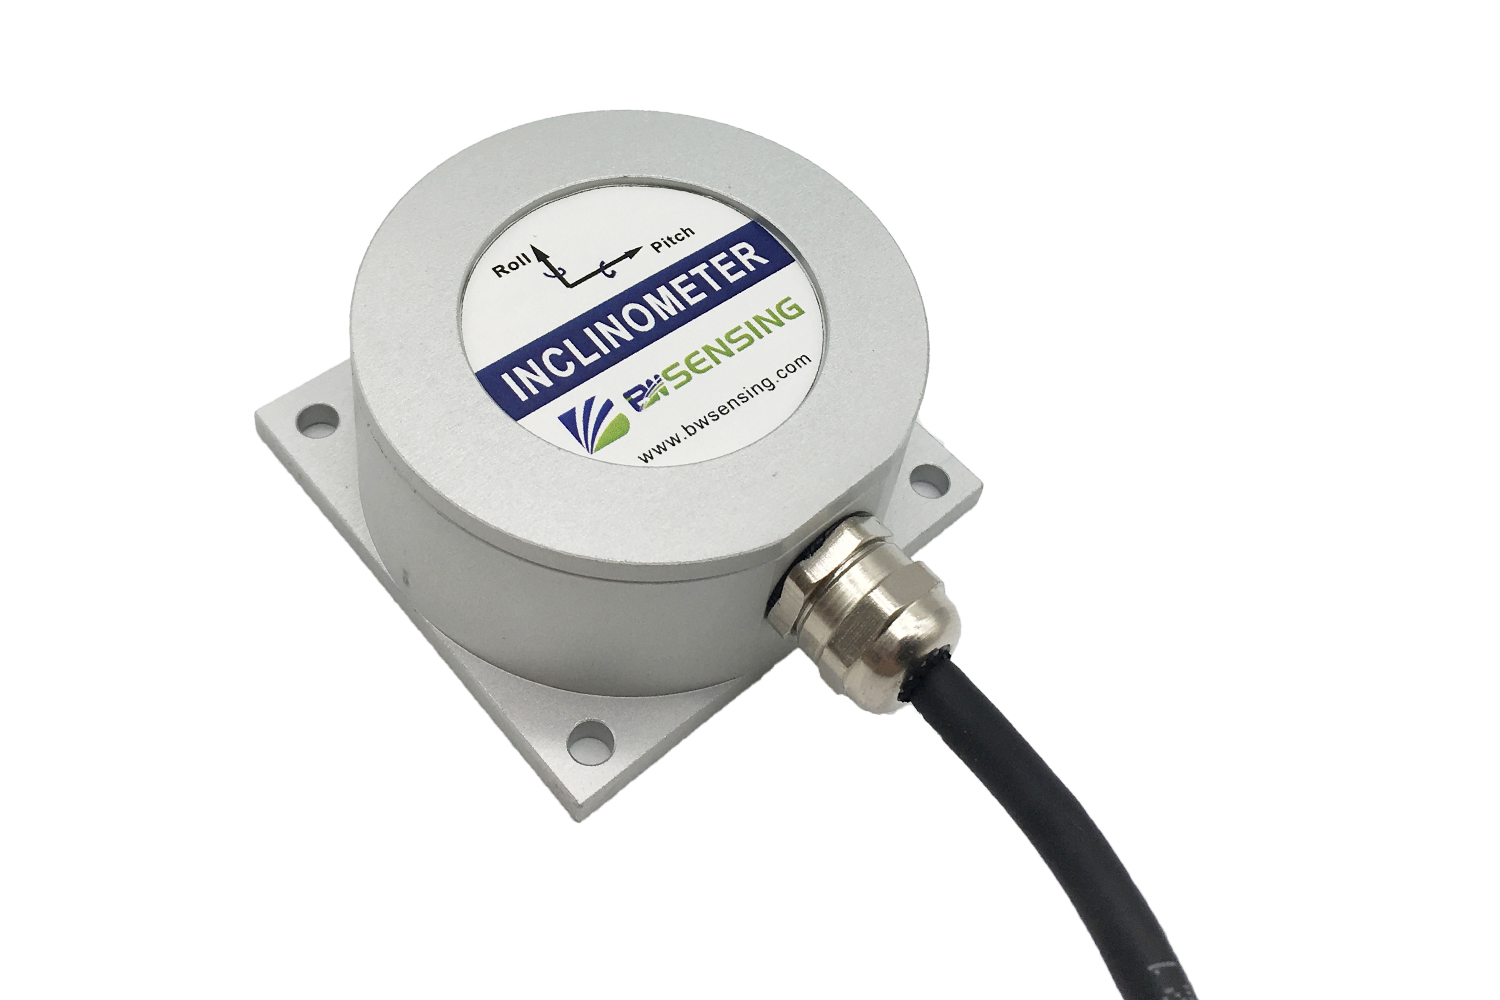 BWSENSING High-precision dynamic inclinometer for tilt measurement in motion or vibration.